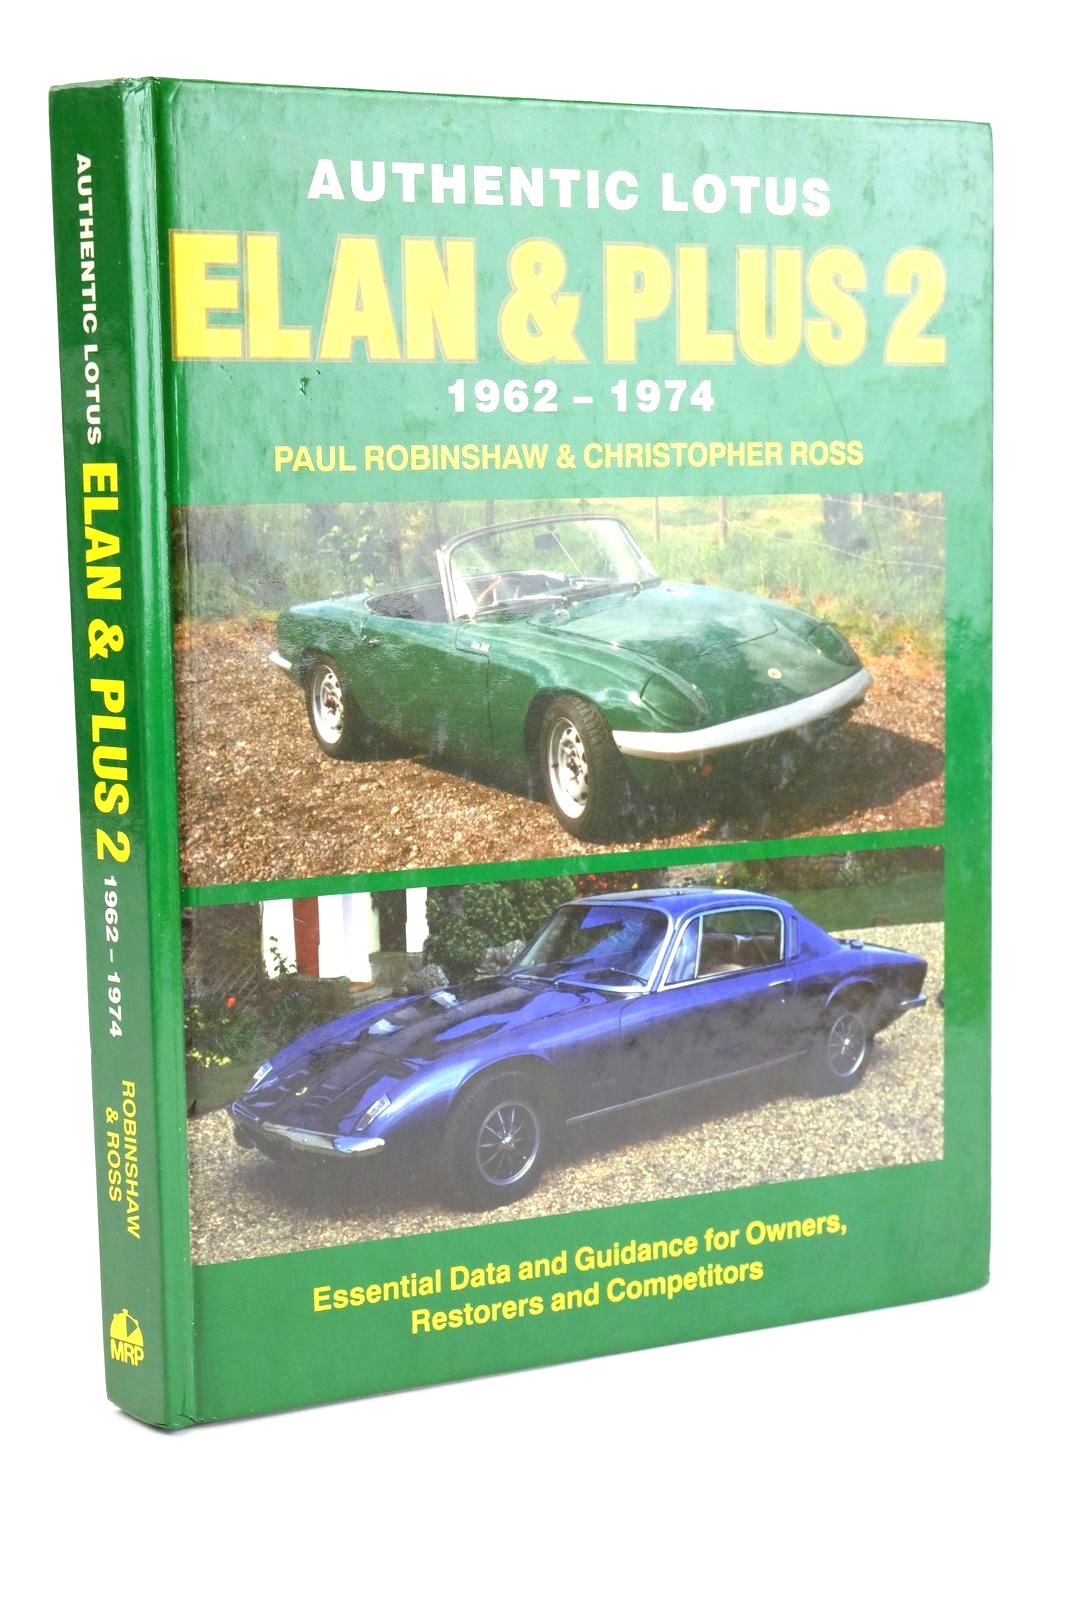 Photo of AUTHENTIC LOTUS ELAN &AMP; PLUS 2 1962-1974 written by Robinshaw, Paul Ross, Christopher Hickman, Ron published by Motor Racing Publications Ltd. (STOCK CODE: 1324019)  for sale by Stella & Rose's Books